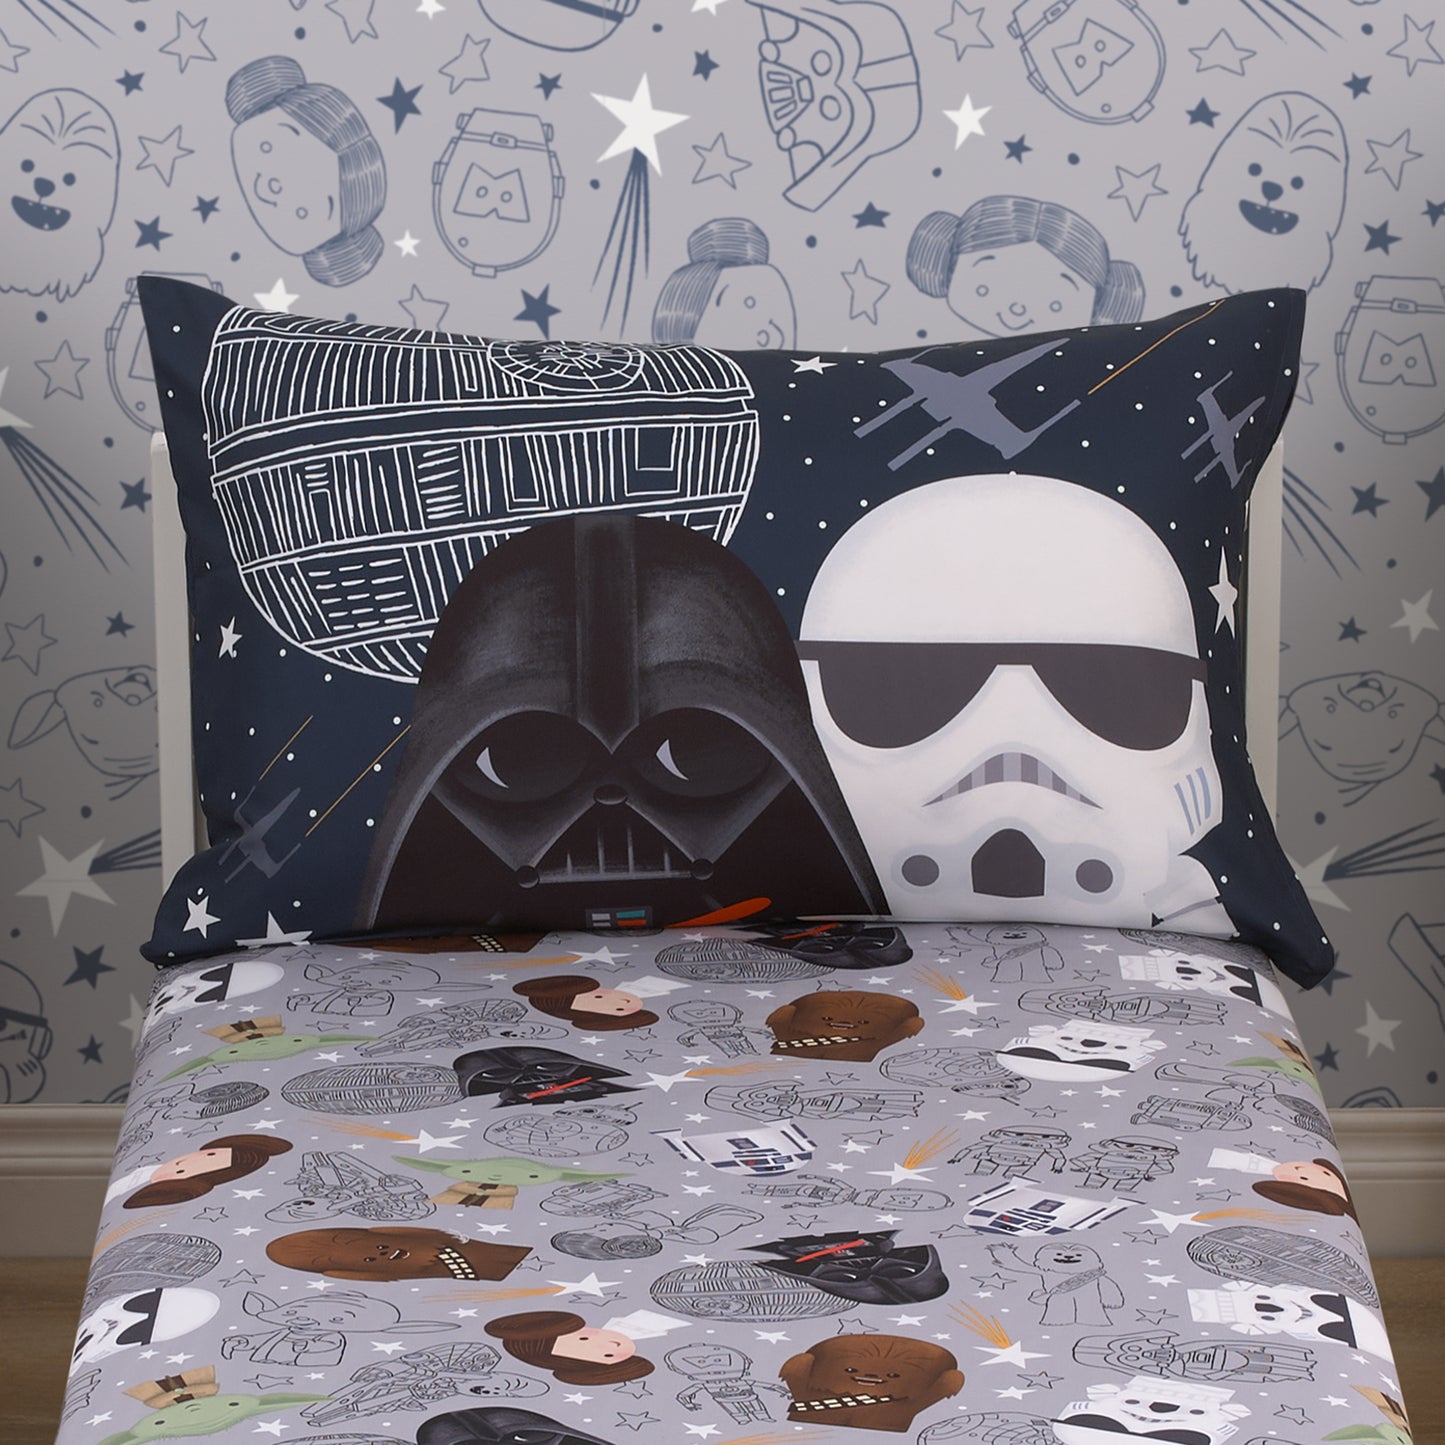 Star Wars Welcome to the Galaxy Navy and Gray Yoda, Princess Leia, R2-D2, and Chewbacca 2 Piece Toddler Sheet Set - Fitted Bottom Sheet and Reversible Pillowcase